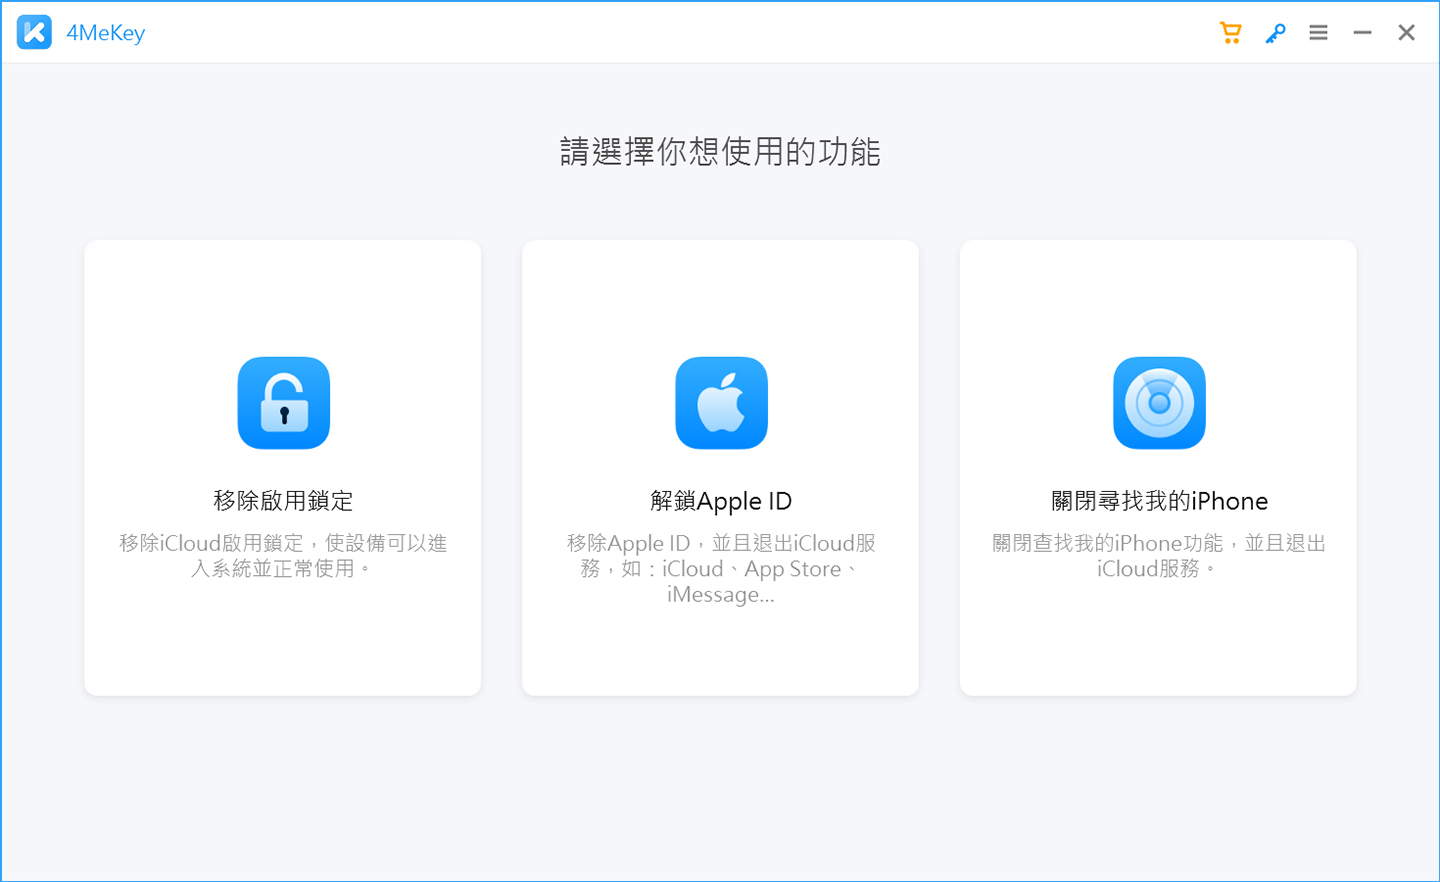 After downloading and installing 4MeKey, the startup program will go to the homepage and directly list the three main functions for users to directly select and use. Among them, 